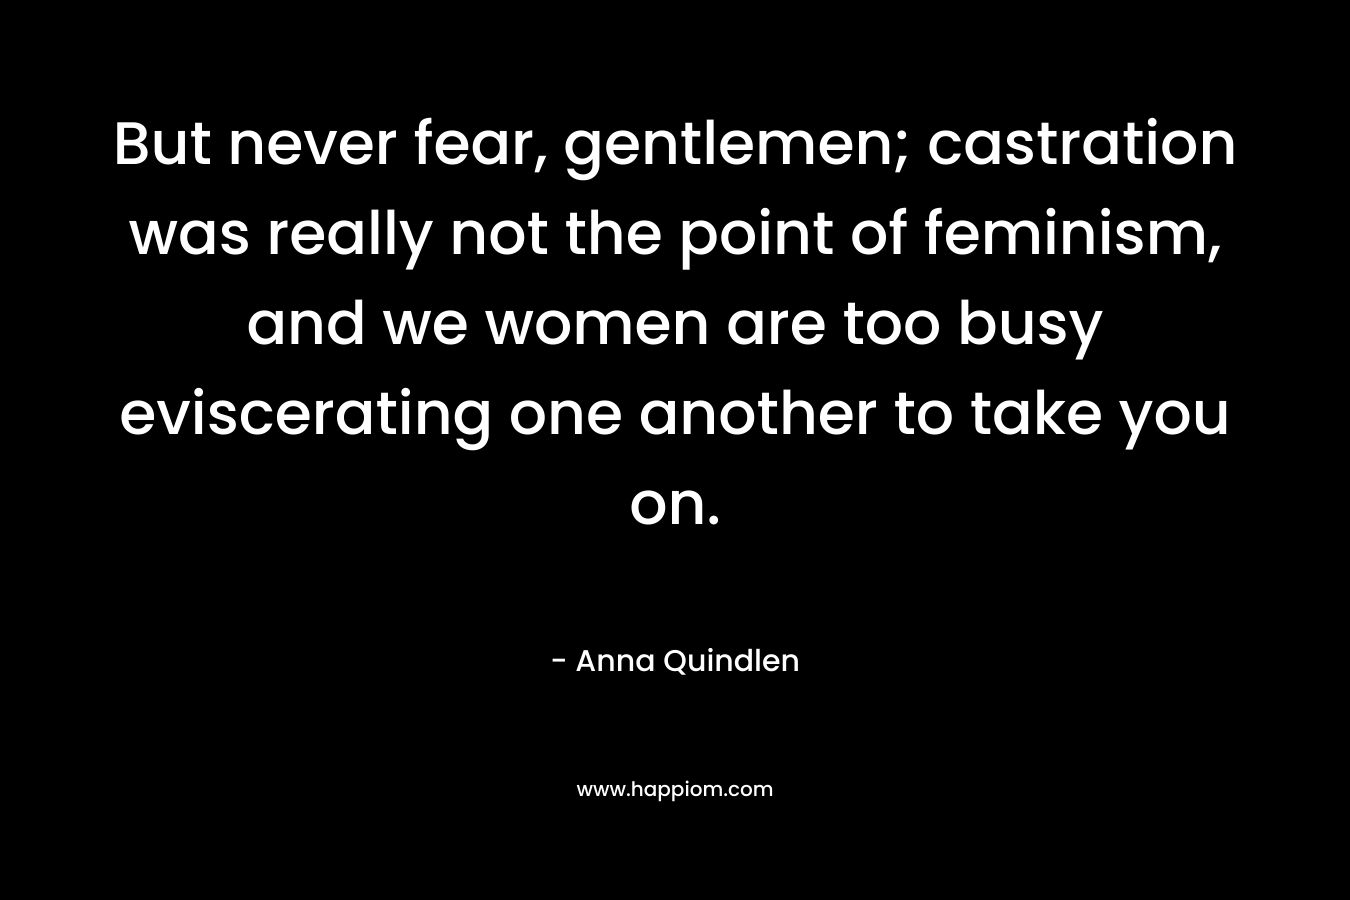 But never fear, gentlemen; castration was really not the point of feminism, and we women are too busy eviscerating one another to take you on. – Anna Quindlen